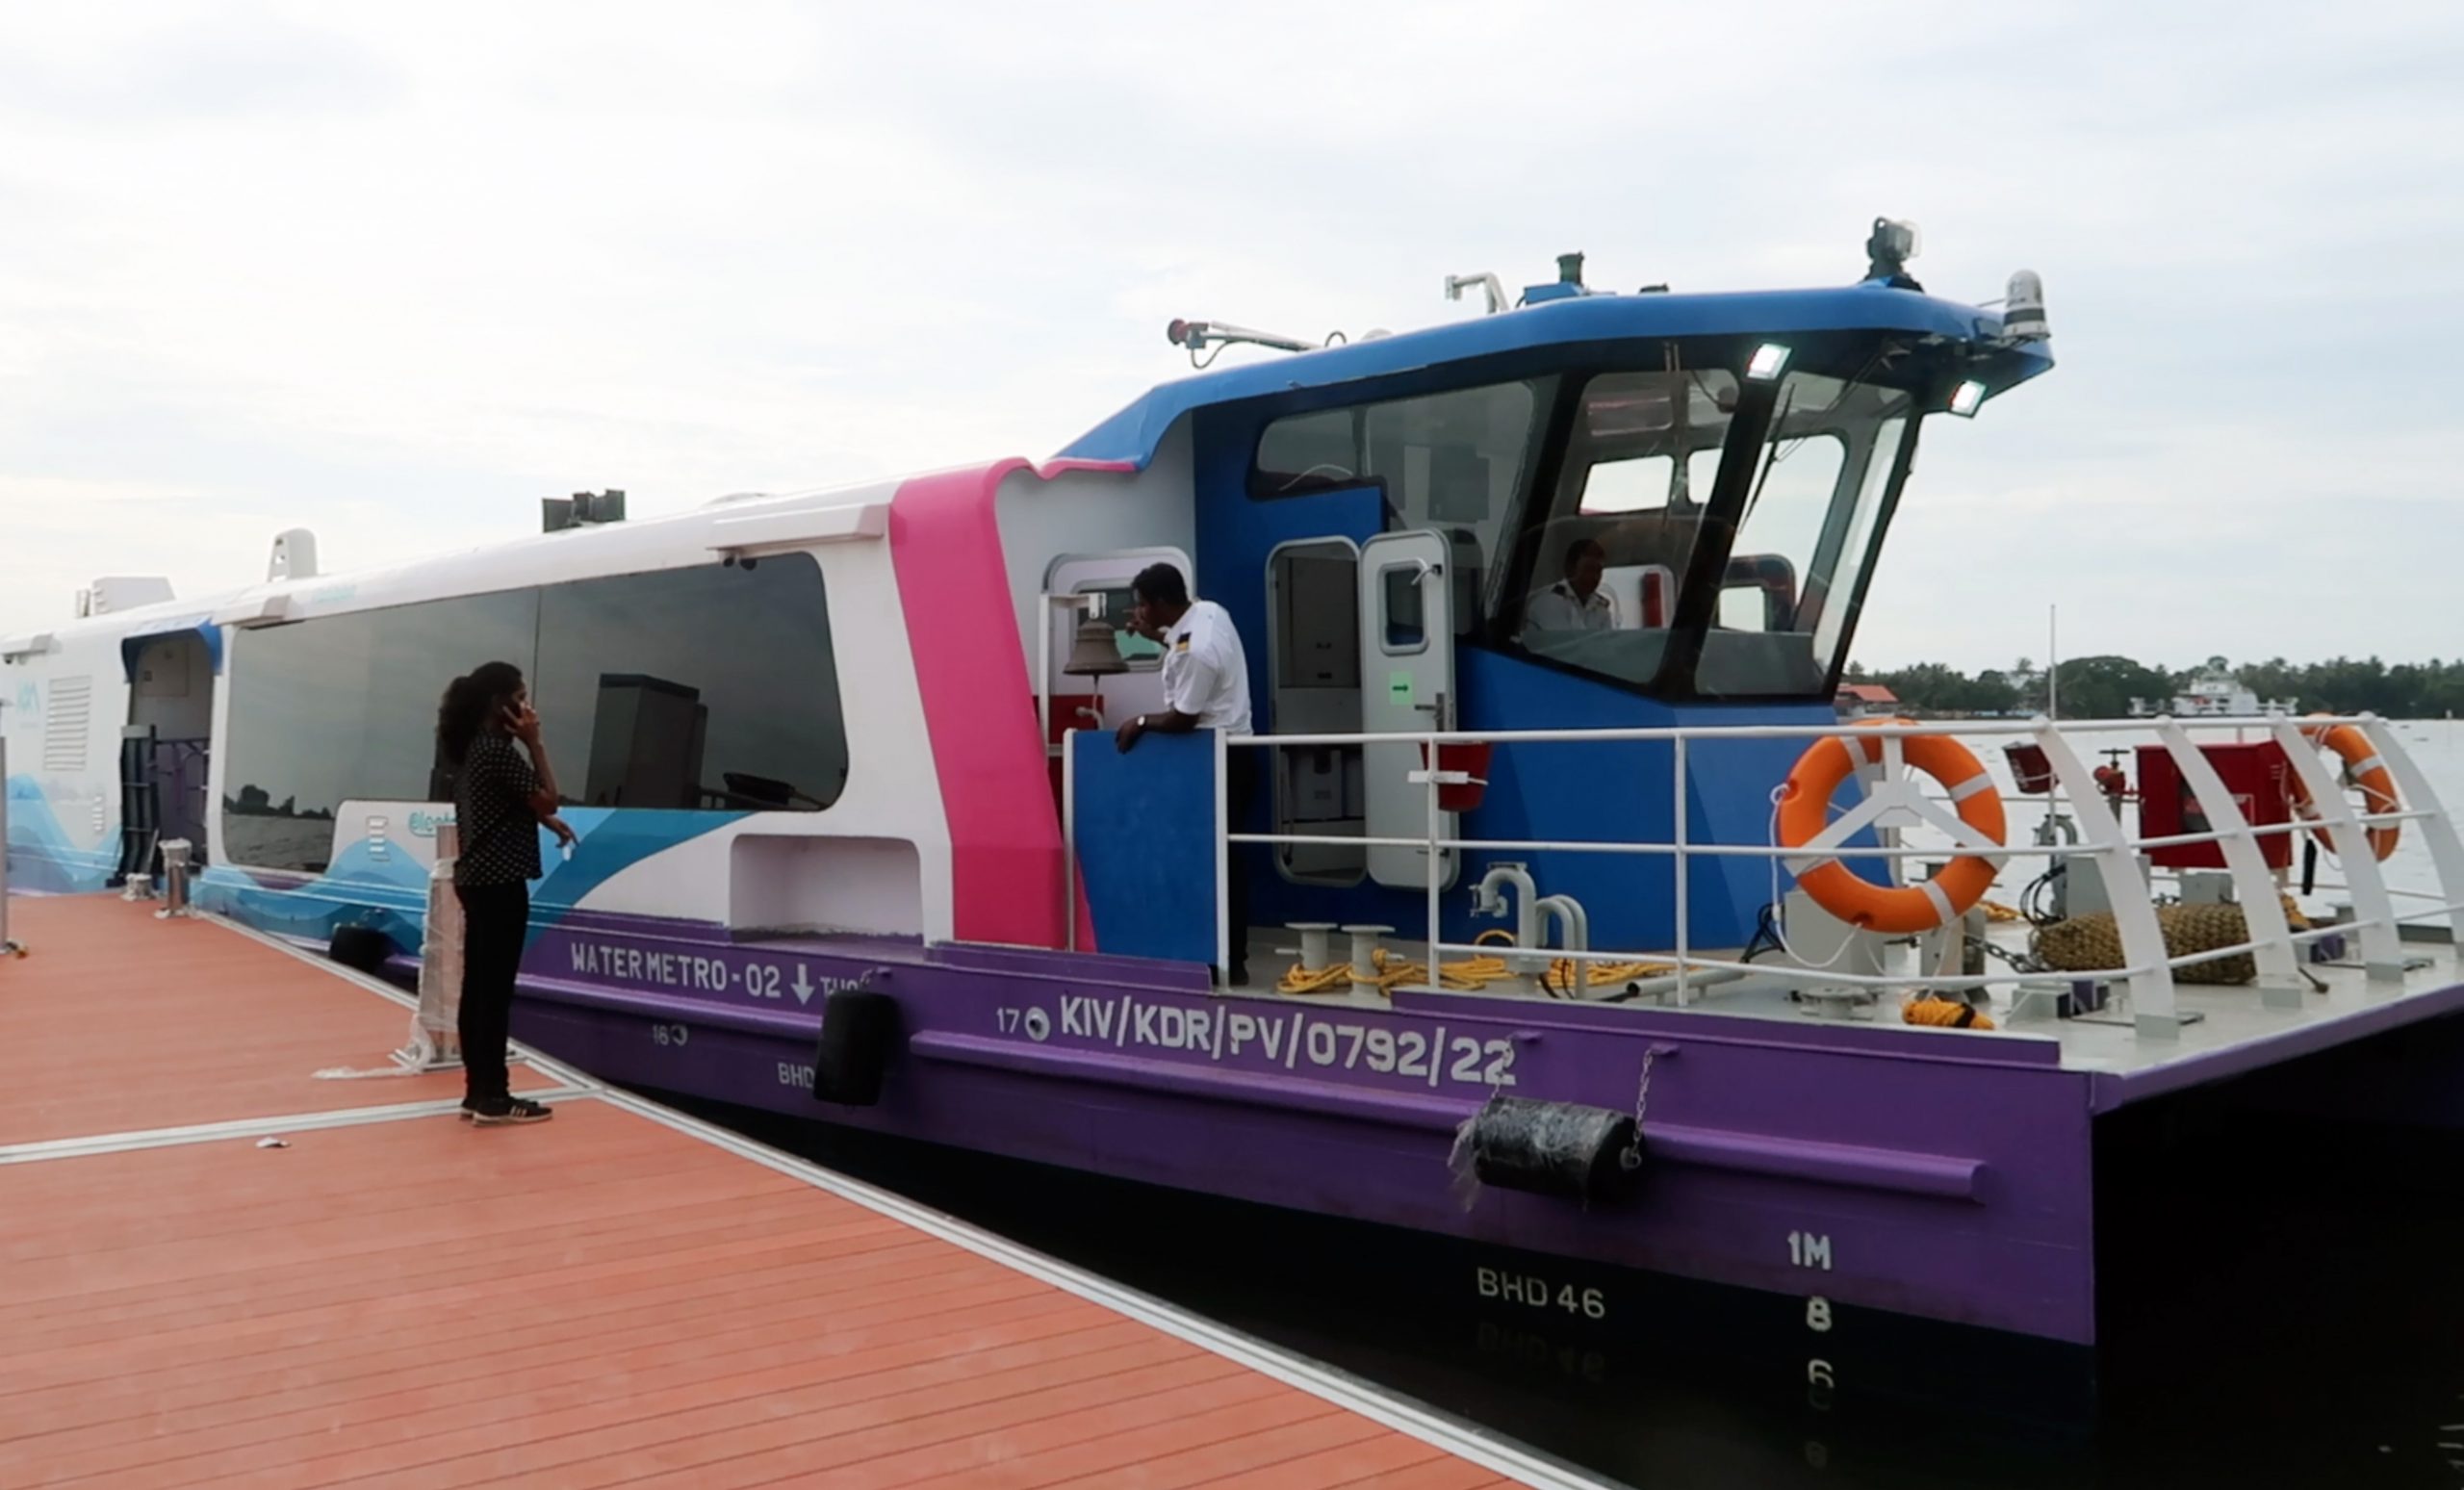 India gets first Water Metro in Kochi! PM Modi dedicates this project to the nation